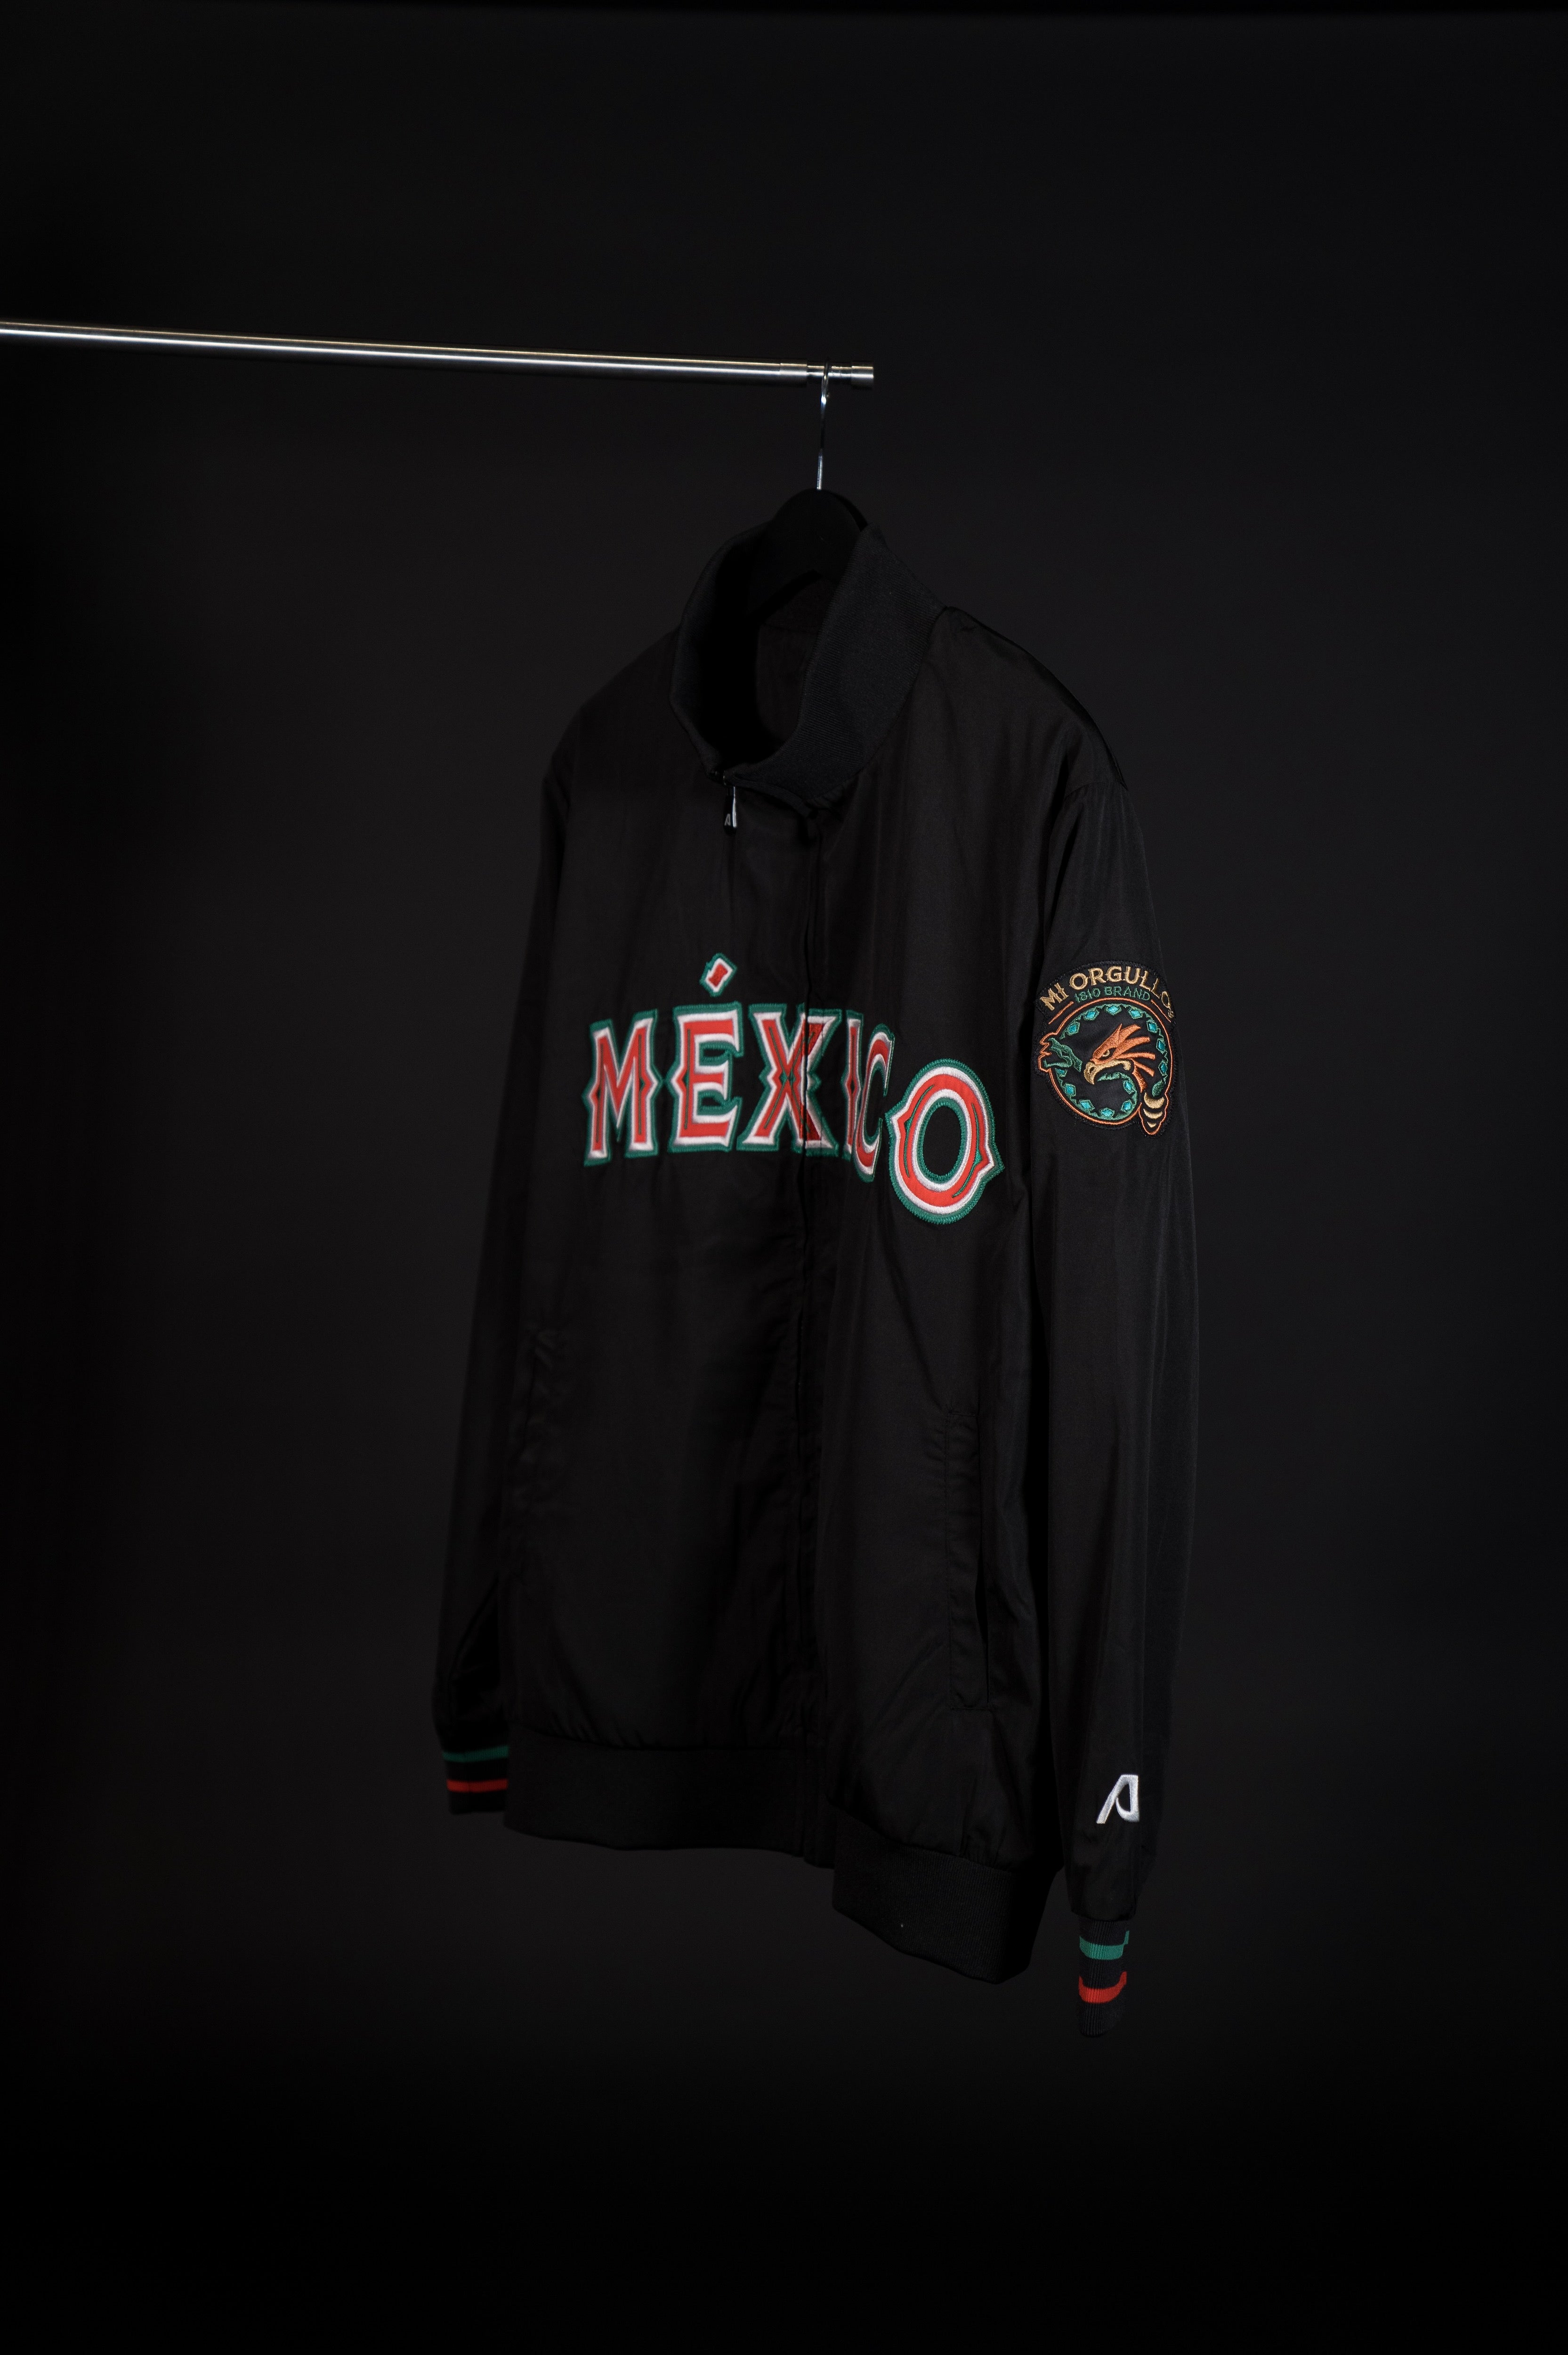 Mexico jackets just in time for the holidays.